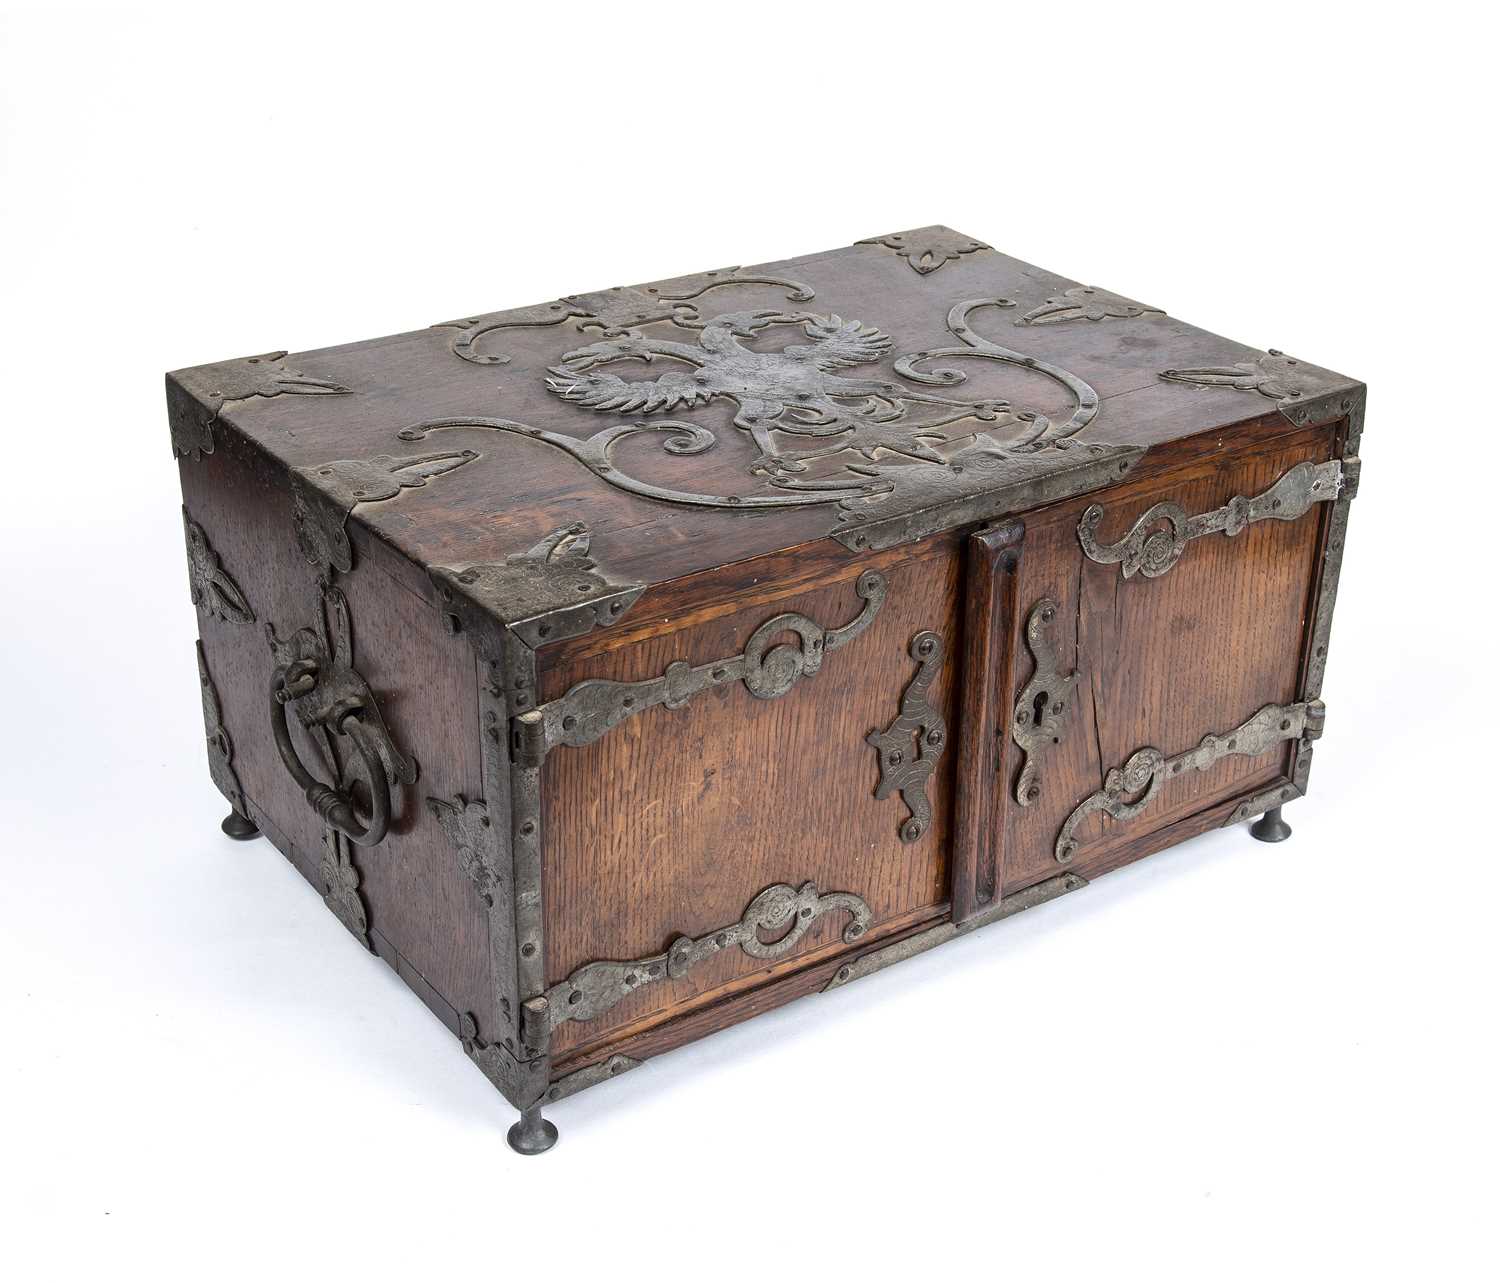 A 17th century German oak and metal bound table top cabinet of drawers, having a double headed eagle - Image 3 of 10